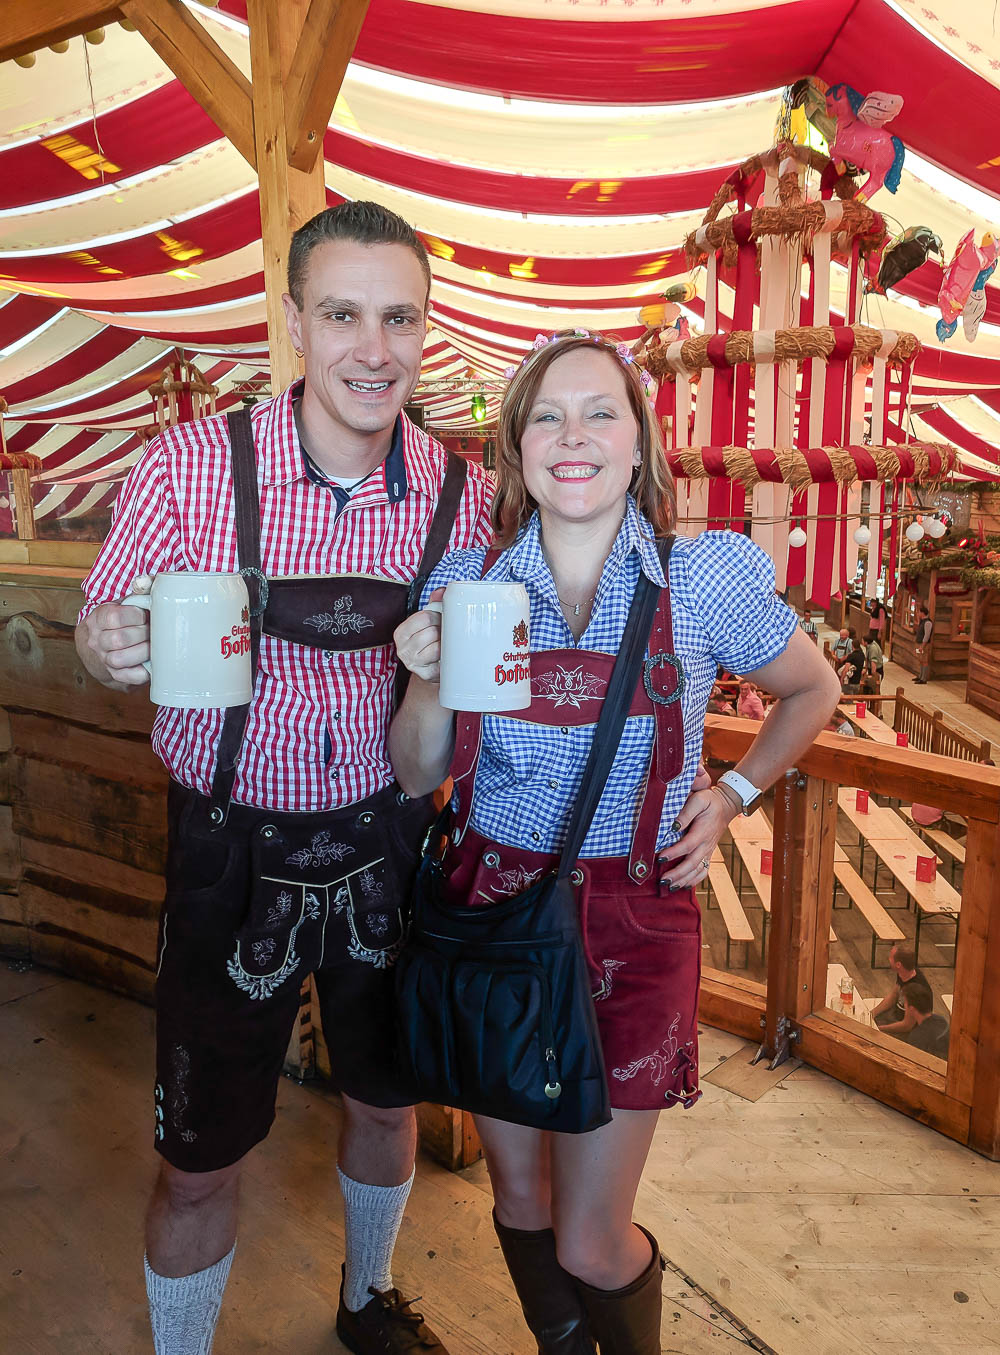 What To Wear To Oktoberfest If You Don't Want To Dress Up